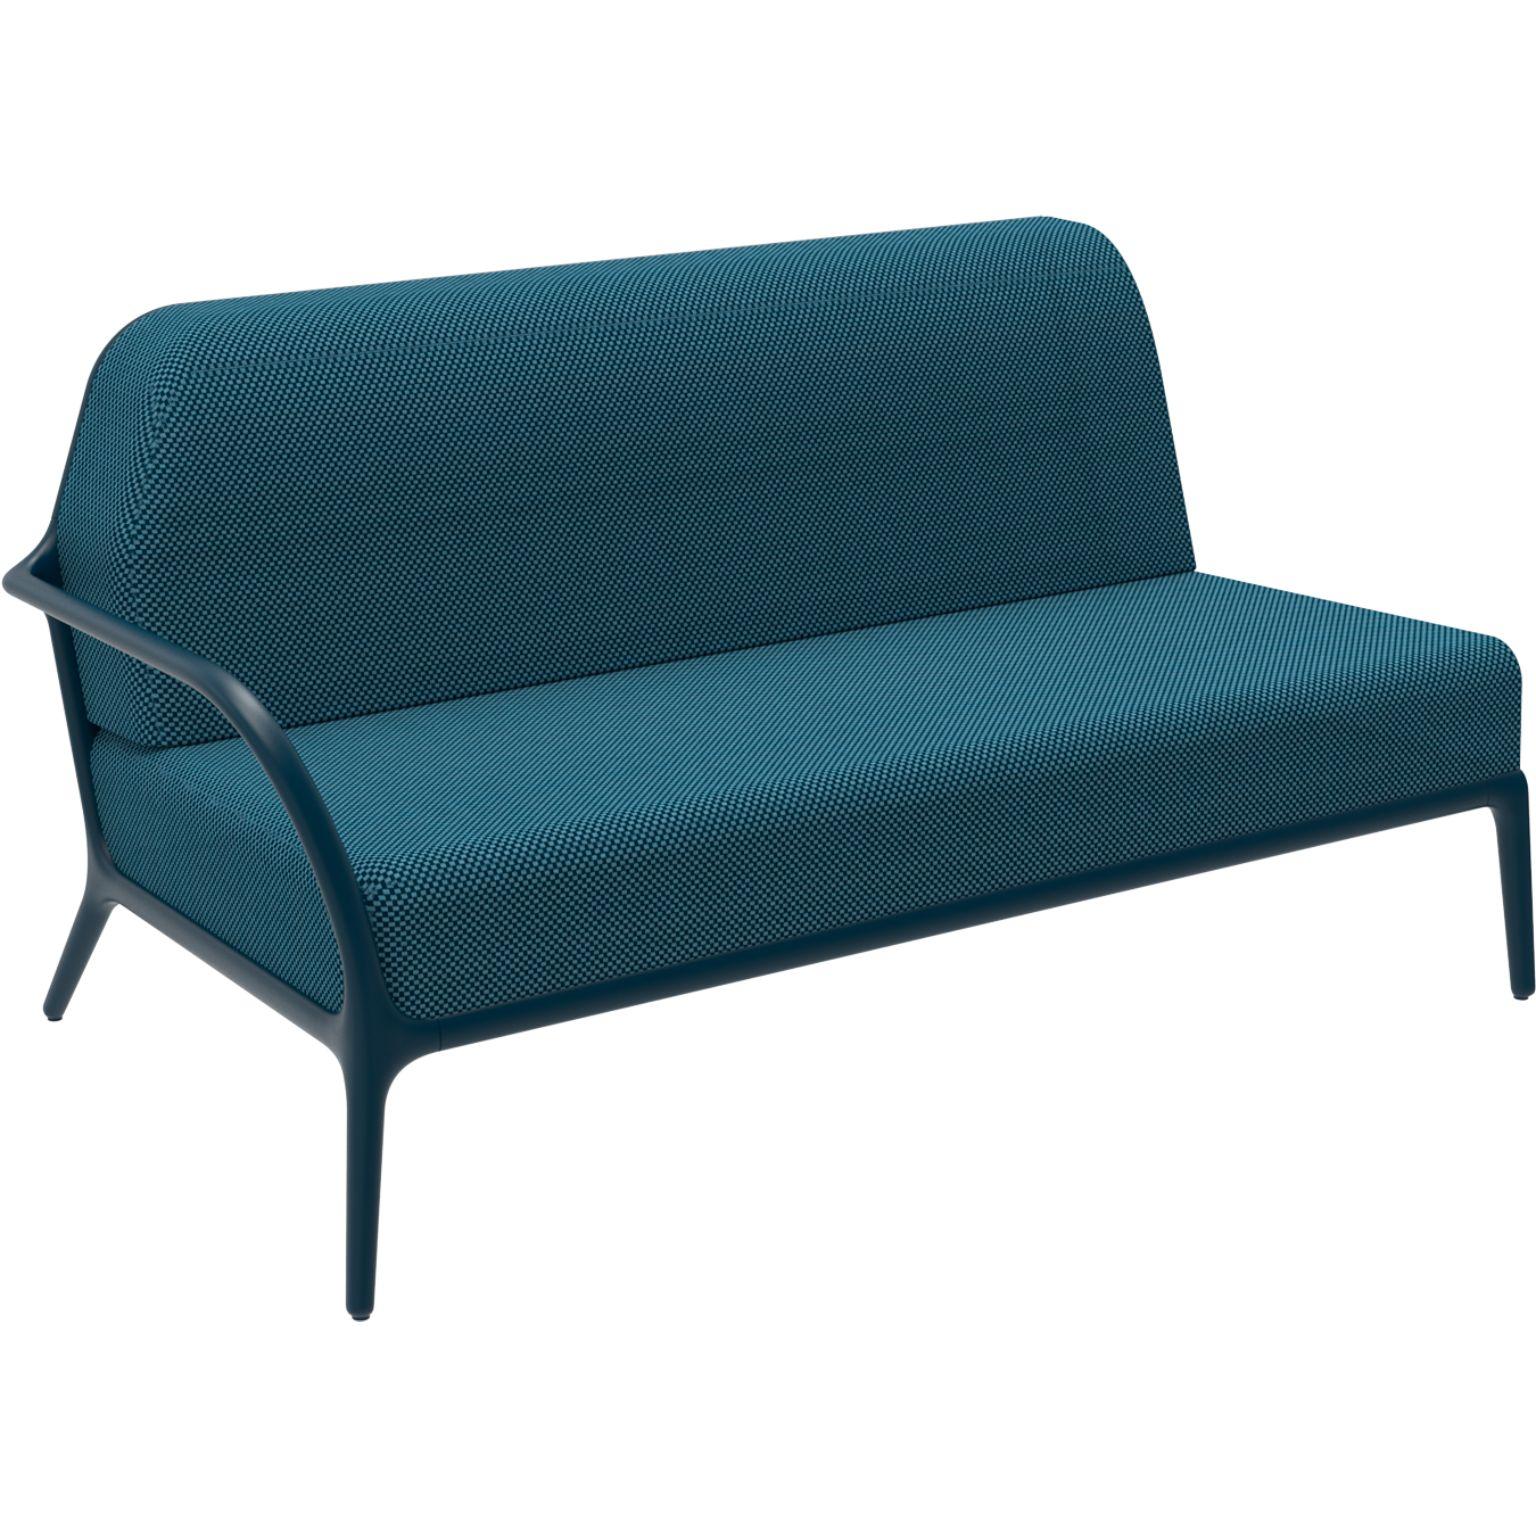 Xaloc Right 160 navy modular sofa by Mowee.
Dimensions: D100 x W160 x H81 cm (Seat Height 42 cm)
Material: Aluminium, Textile
Weight: 37 kg
Also Available in different colours and finishes. 
 
Xaloc synthesizes the lines of interior furniture